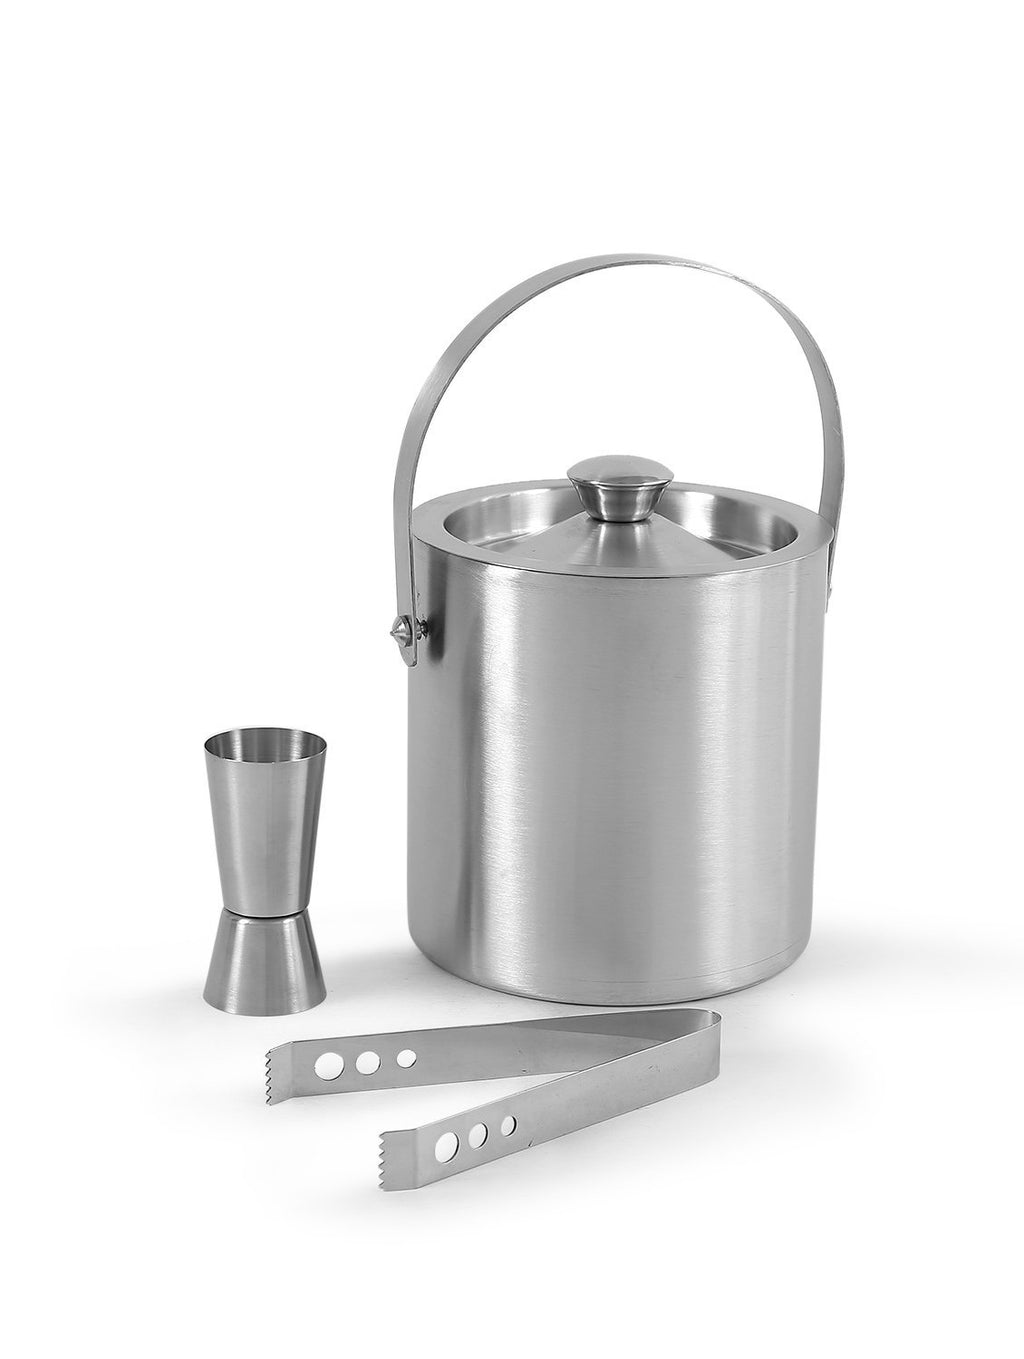 Anything & Everything Stainless Steel Bar Accessories Set of 3 Pieces | Ice Bucket | Ice Tong | Peg Measure - Ideal for Party Get Together and Gifting